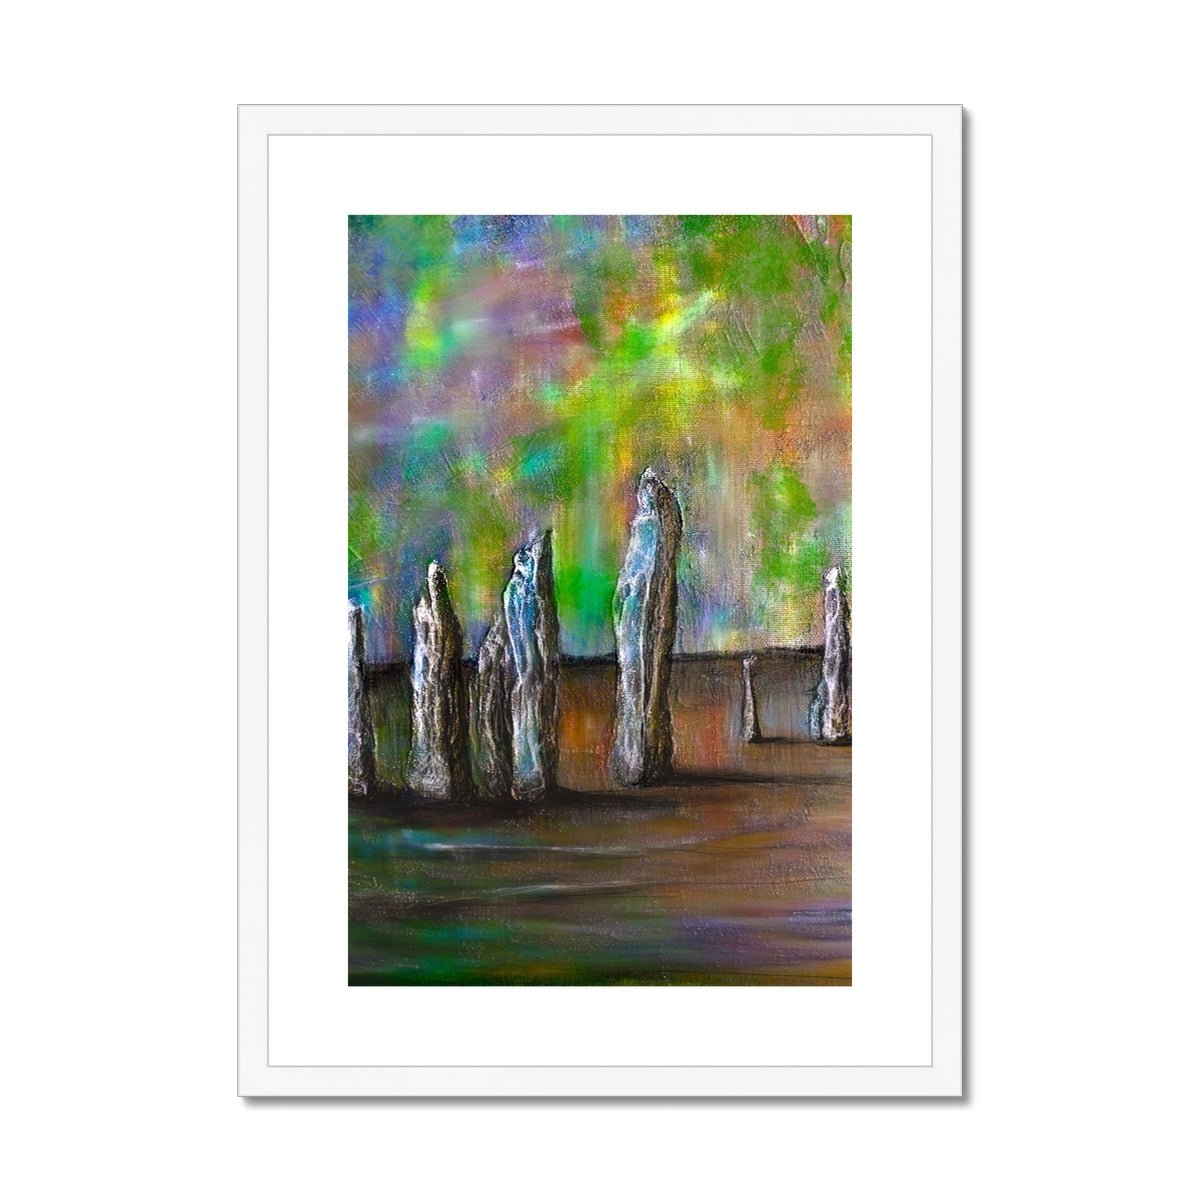 Callanish Northern Lights Lewis Painting | Framed & Mounted Prints From Scotland-Framed & Mounted Prints-Hebridean Islands Art Gallery-A2 Portrait-White Frame-Paintings, Prints, Homeware, Art Gifts From Scotland By Scottish Artist Kevin Hunter